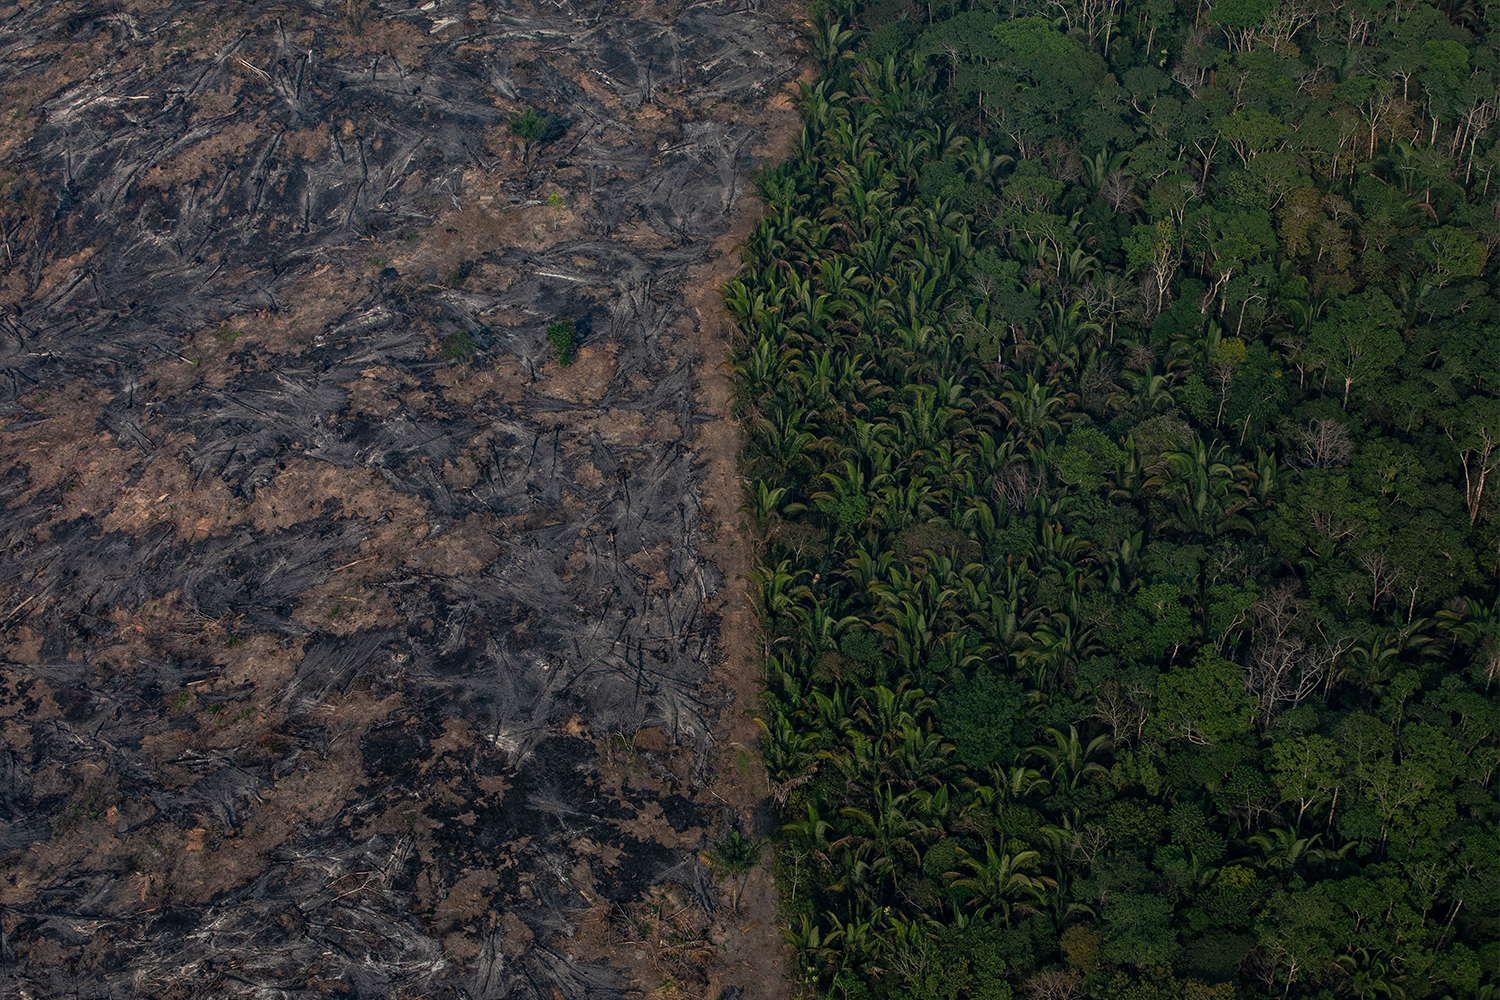 An aerial image of burned Amazon rainforest in the Brazilian state of Rondônia in 2019